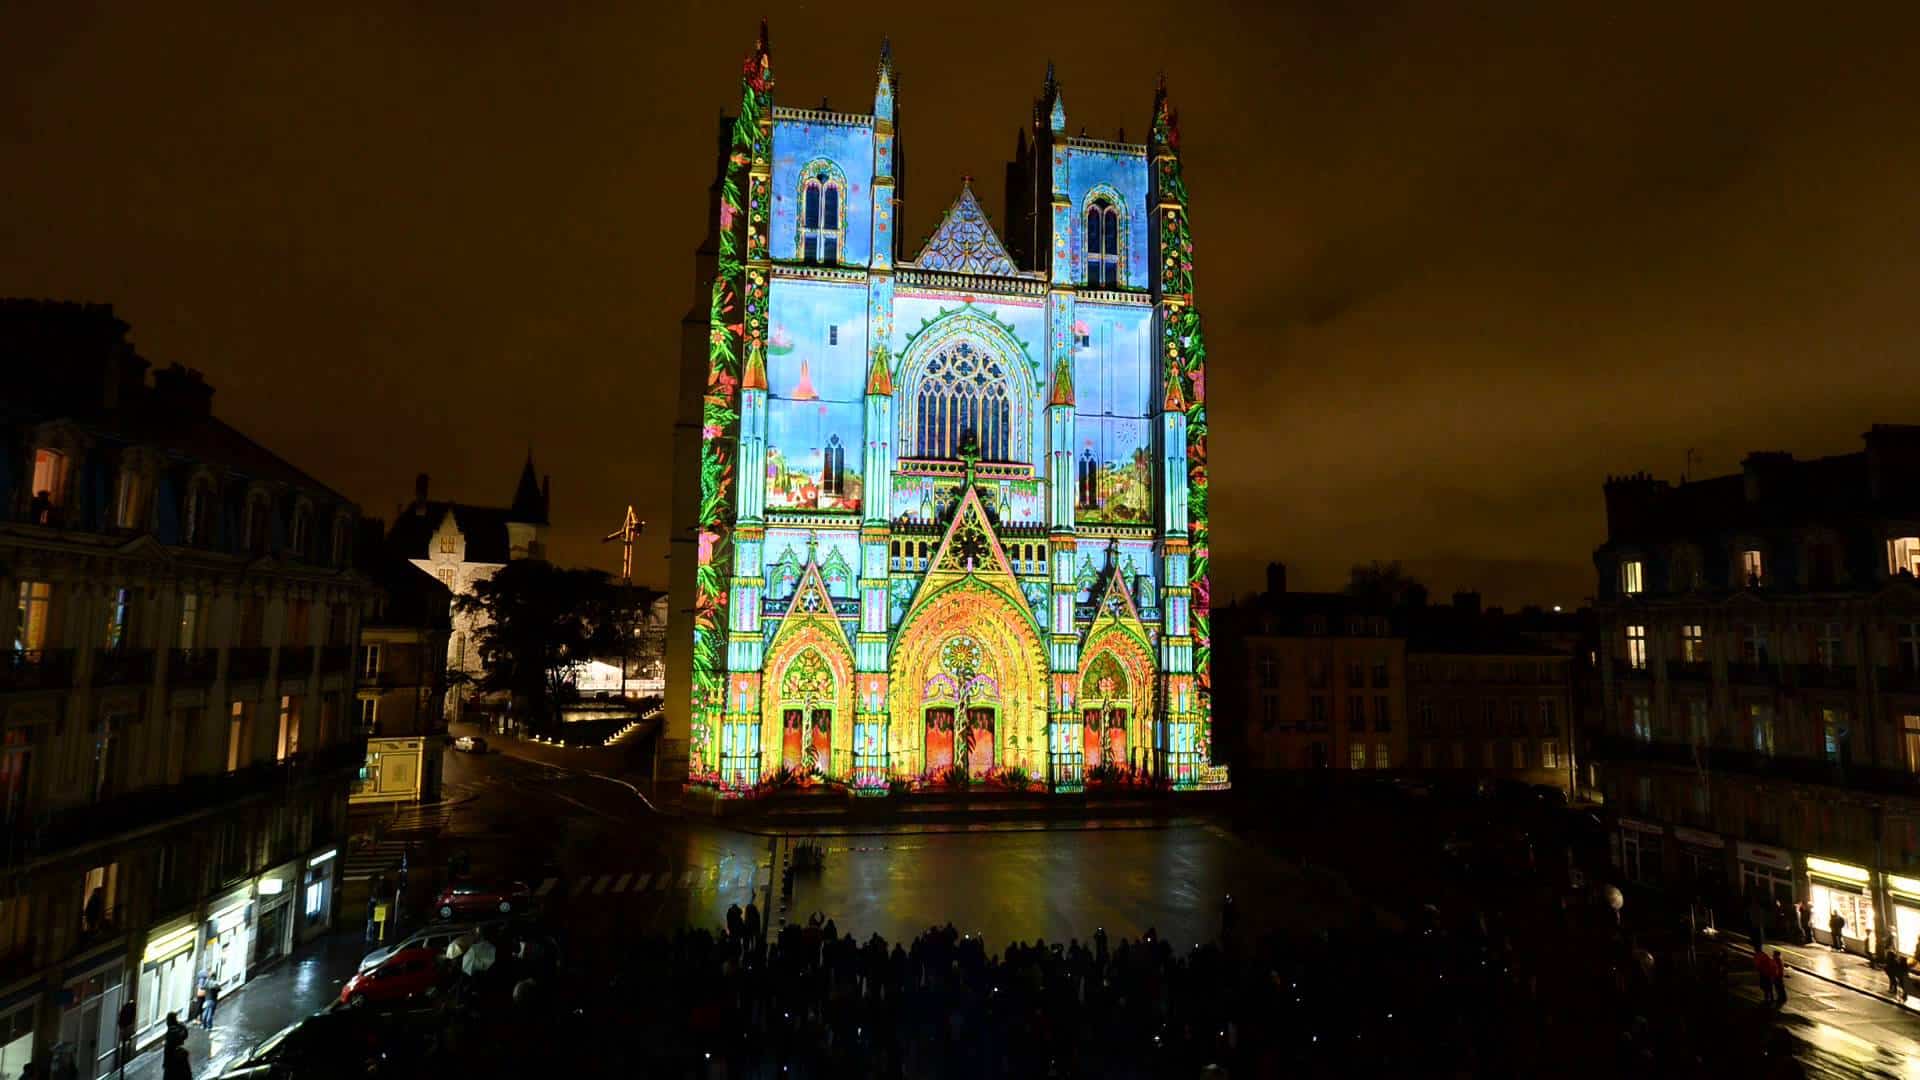 Animated light show on a Gothic cathedral